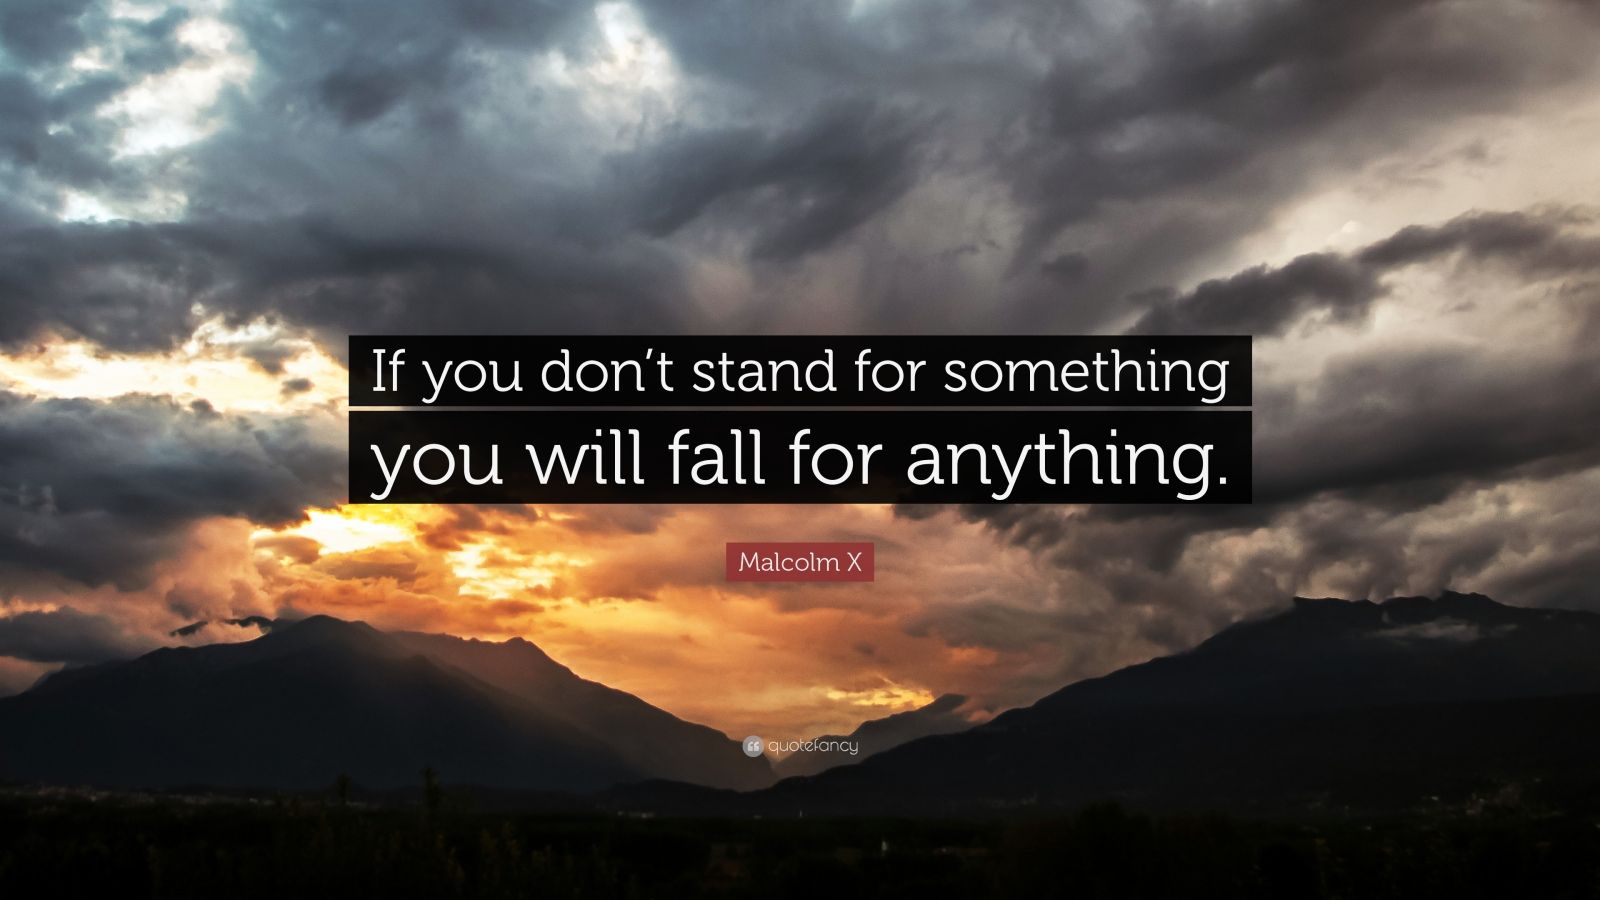 Malcolm X Quote: “If you don’t stand for something you will fall for